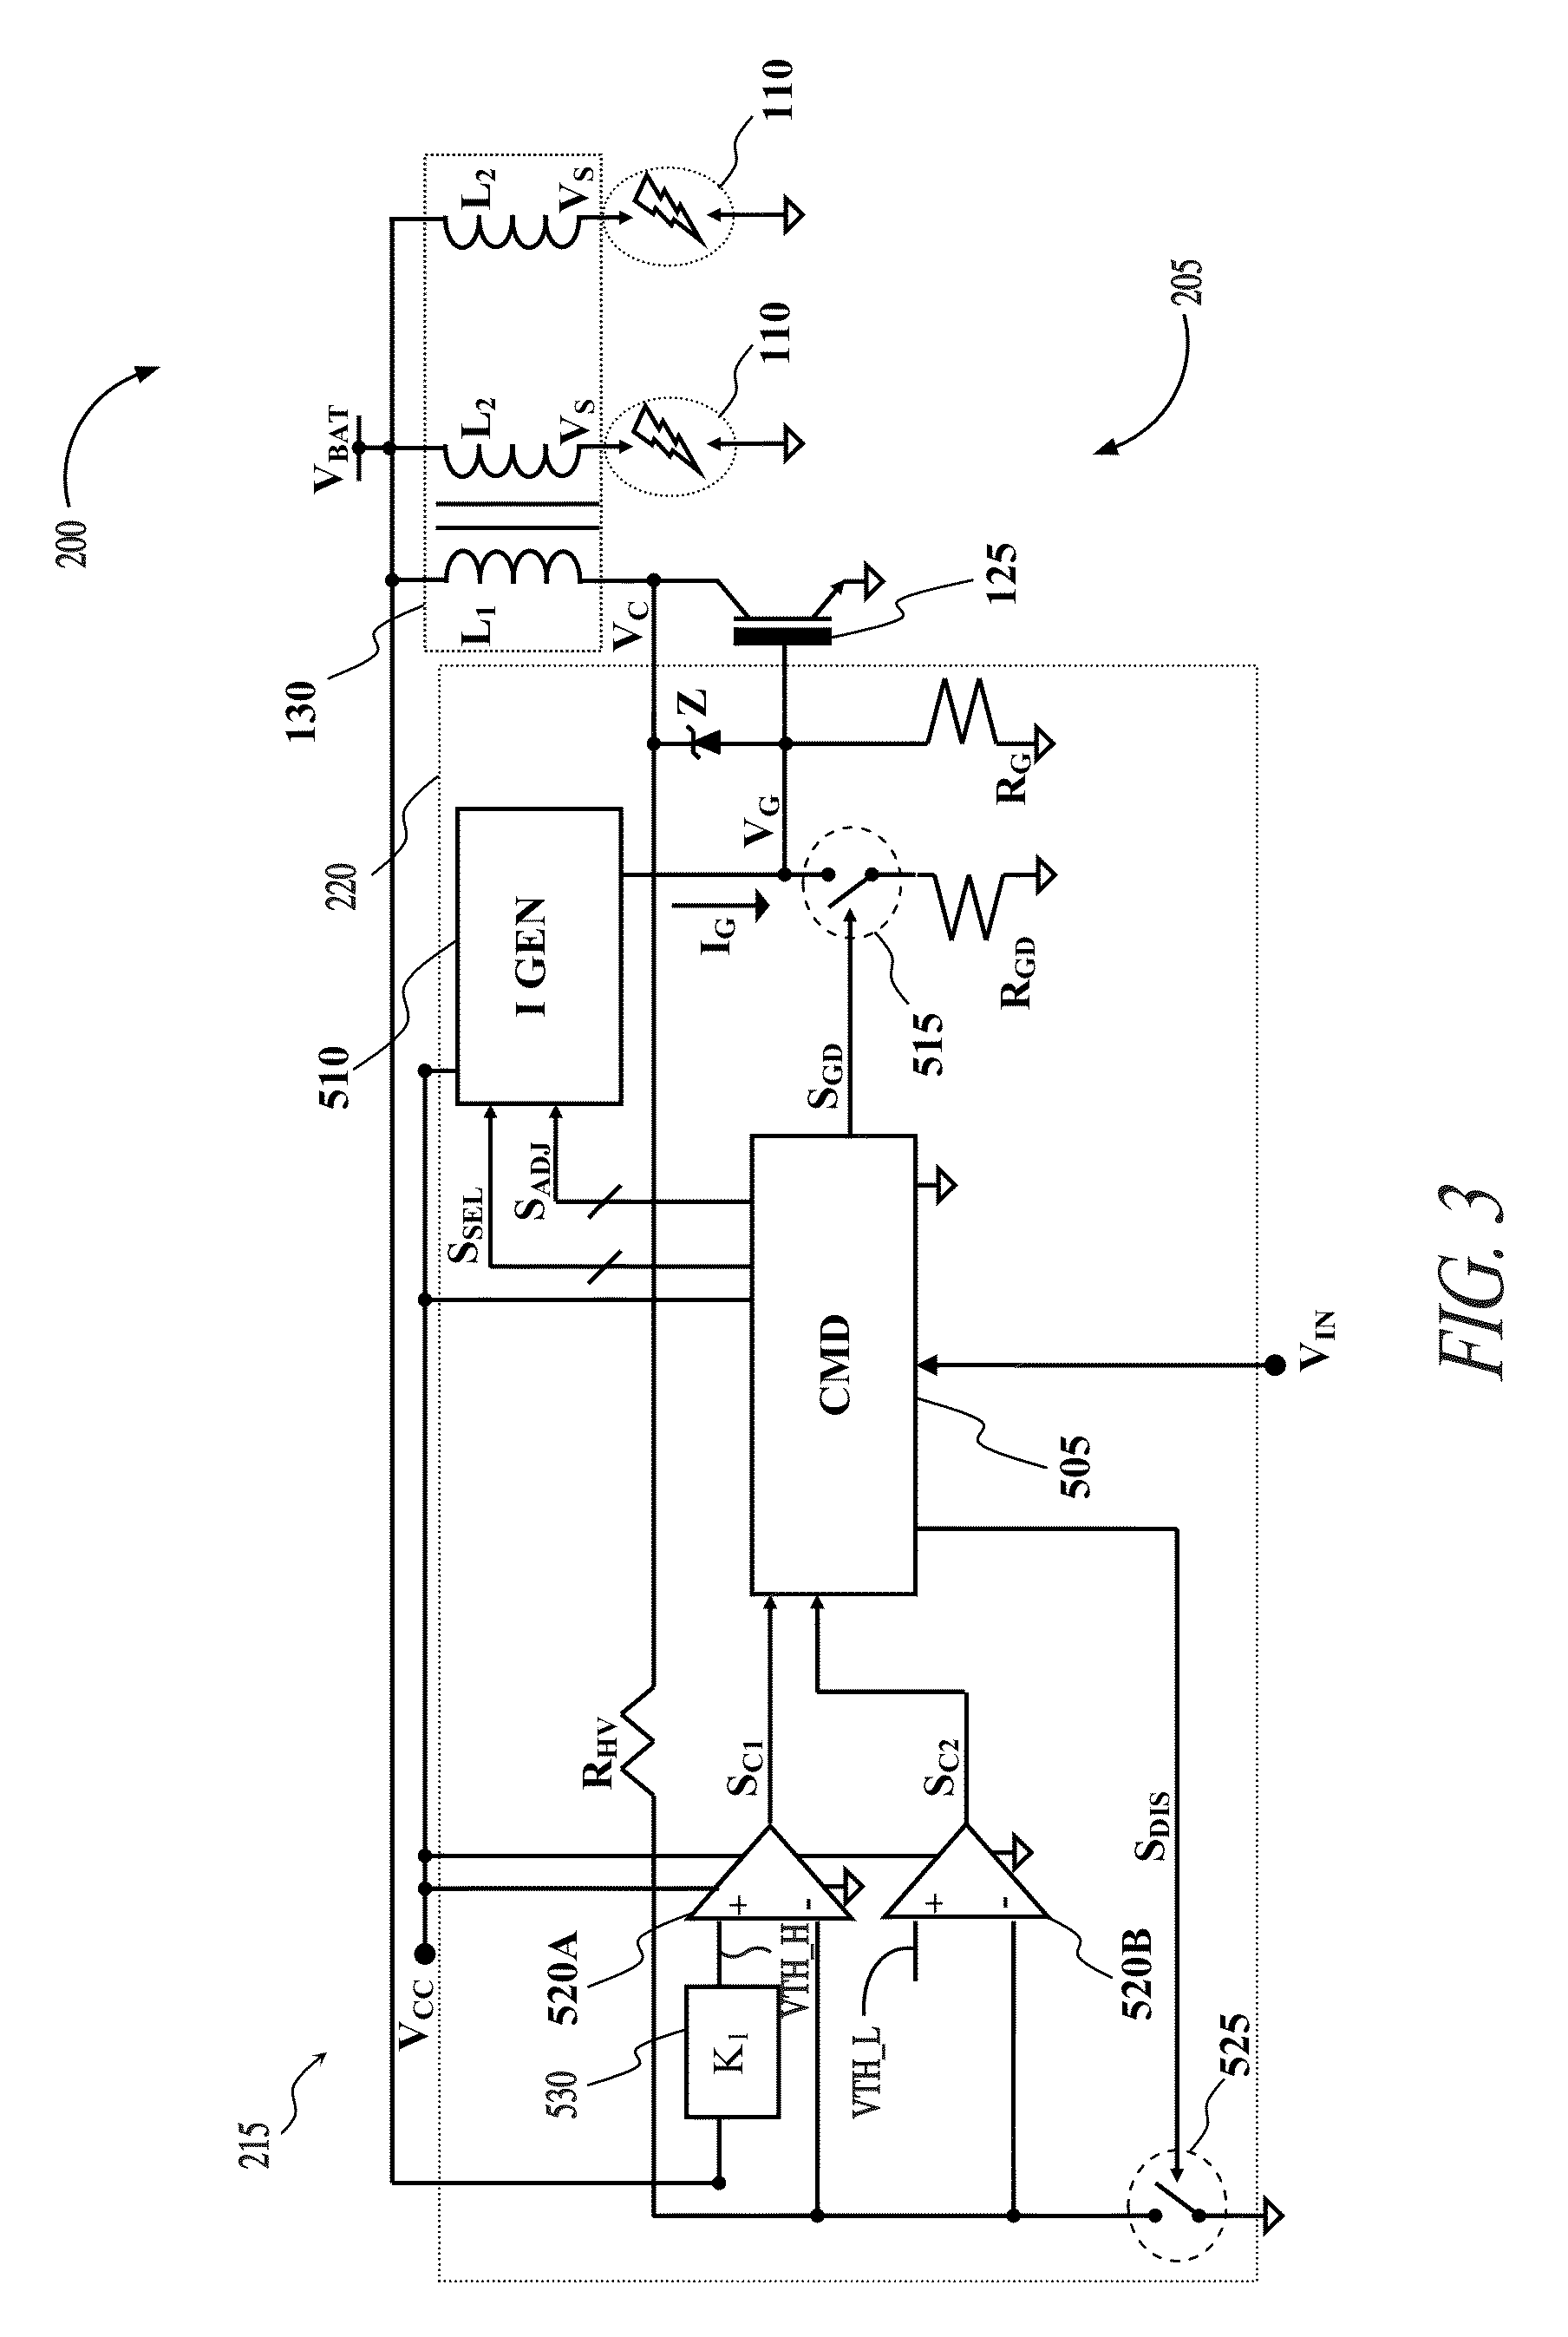 Soft turn-on in an ignition system of a combustion engine